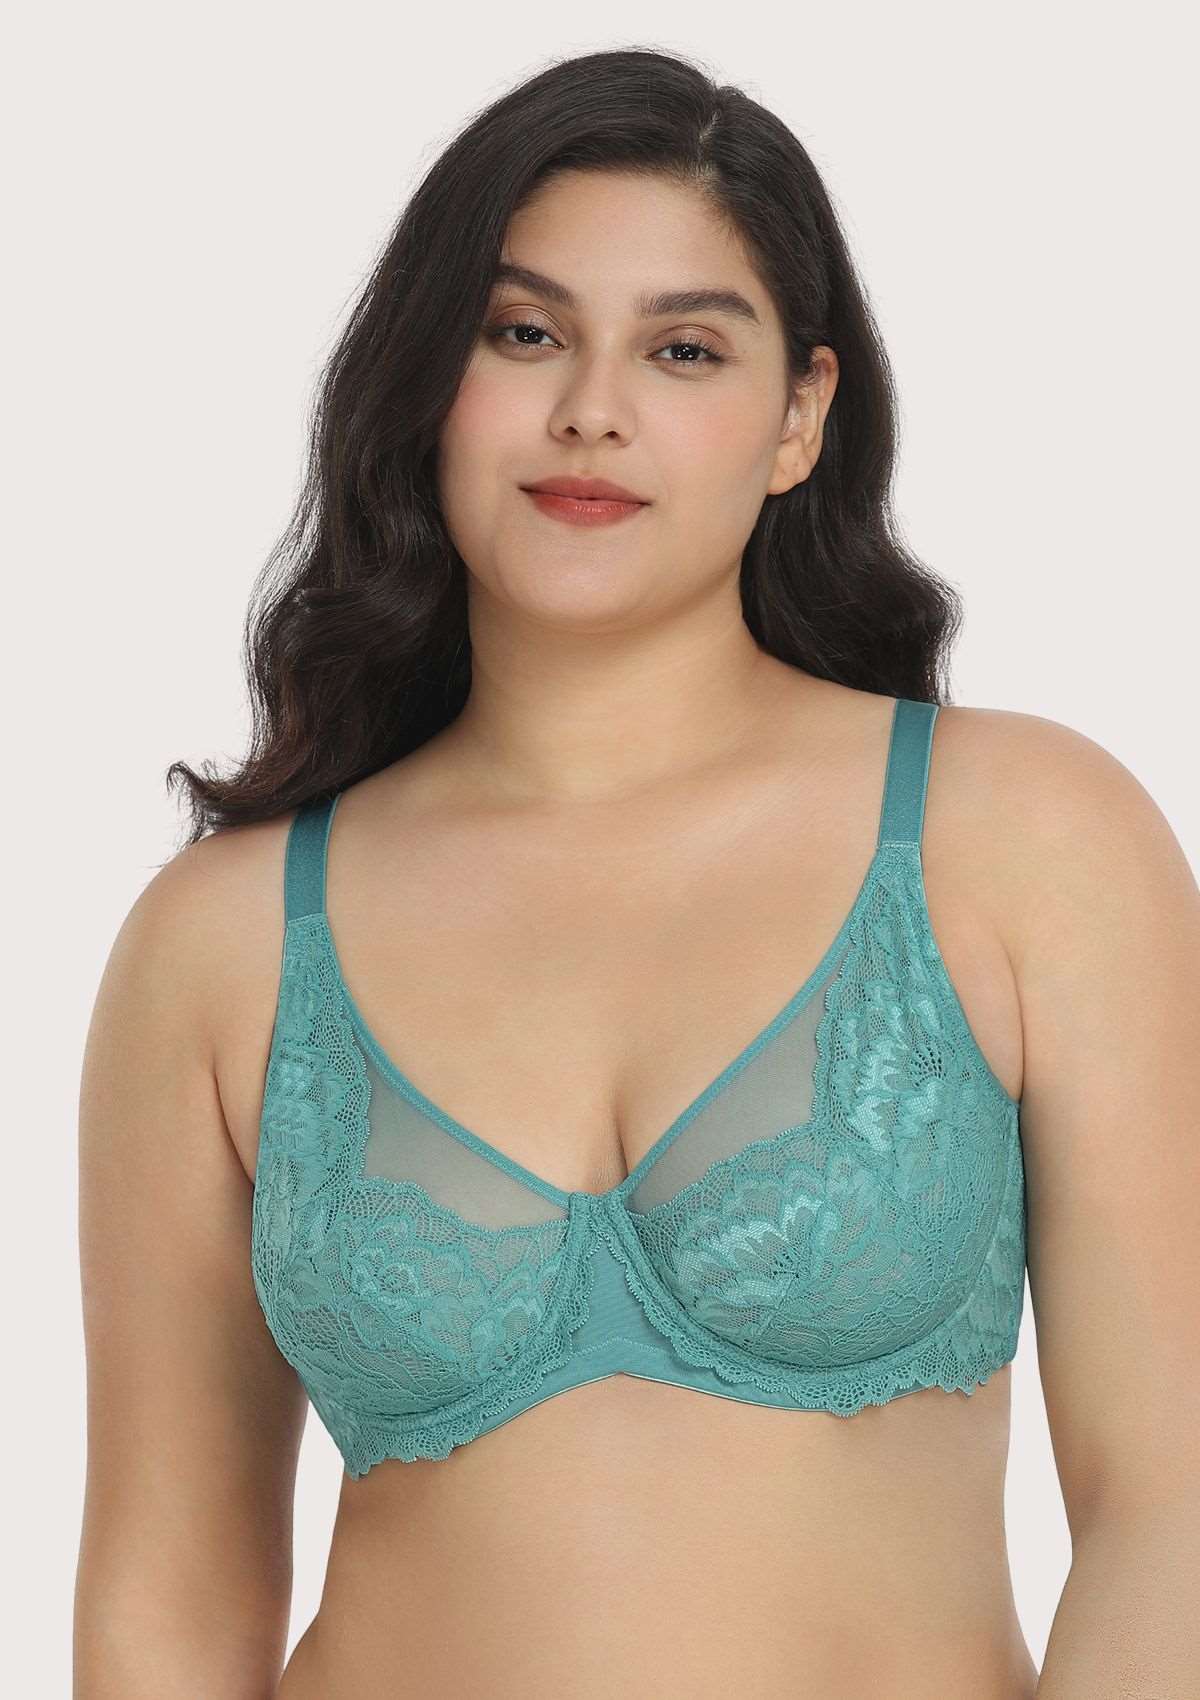 HSIA Paeonia Lace Full Coverage Underwire Non-Padded Uplifting Bra - Teal / 36 / D